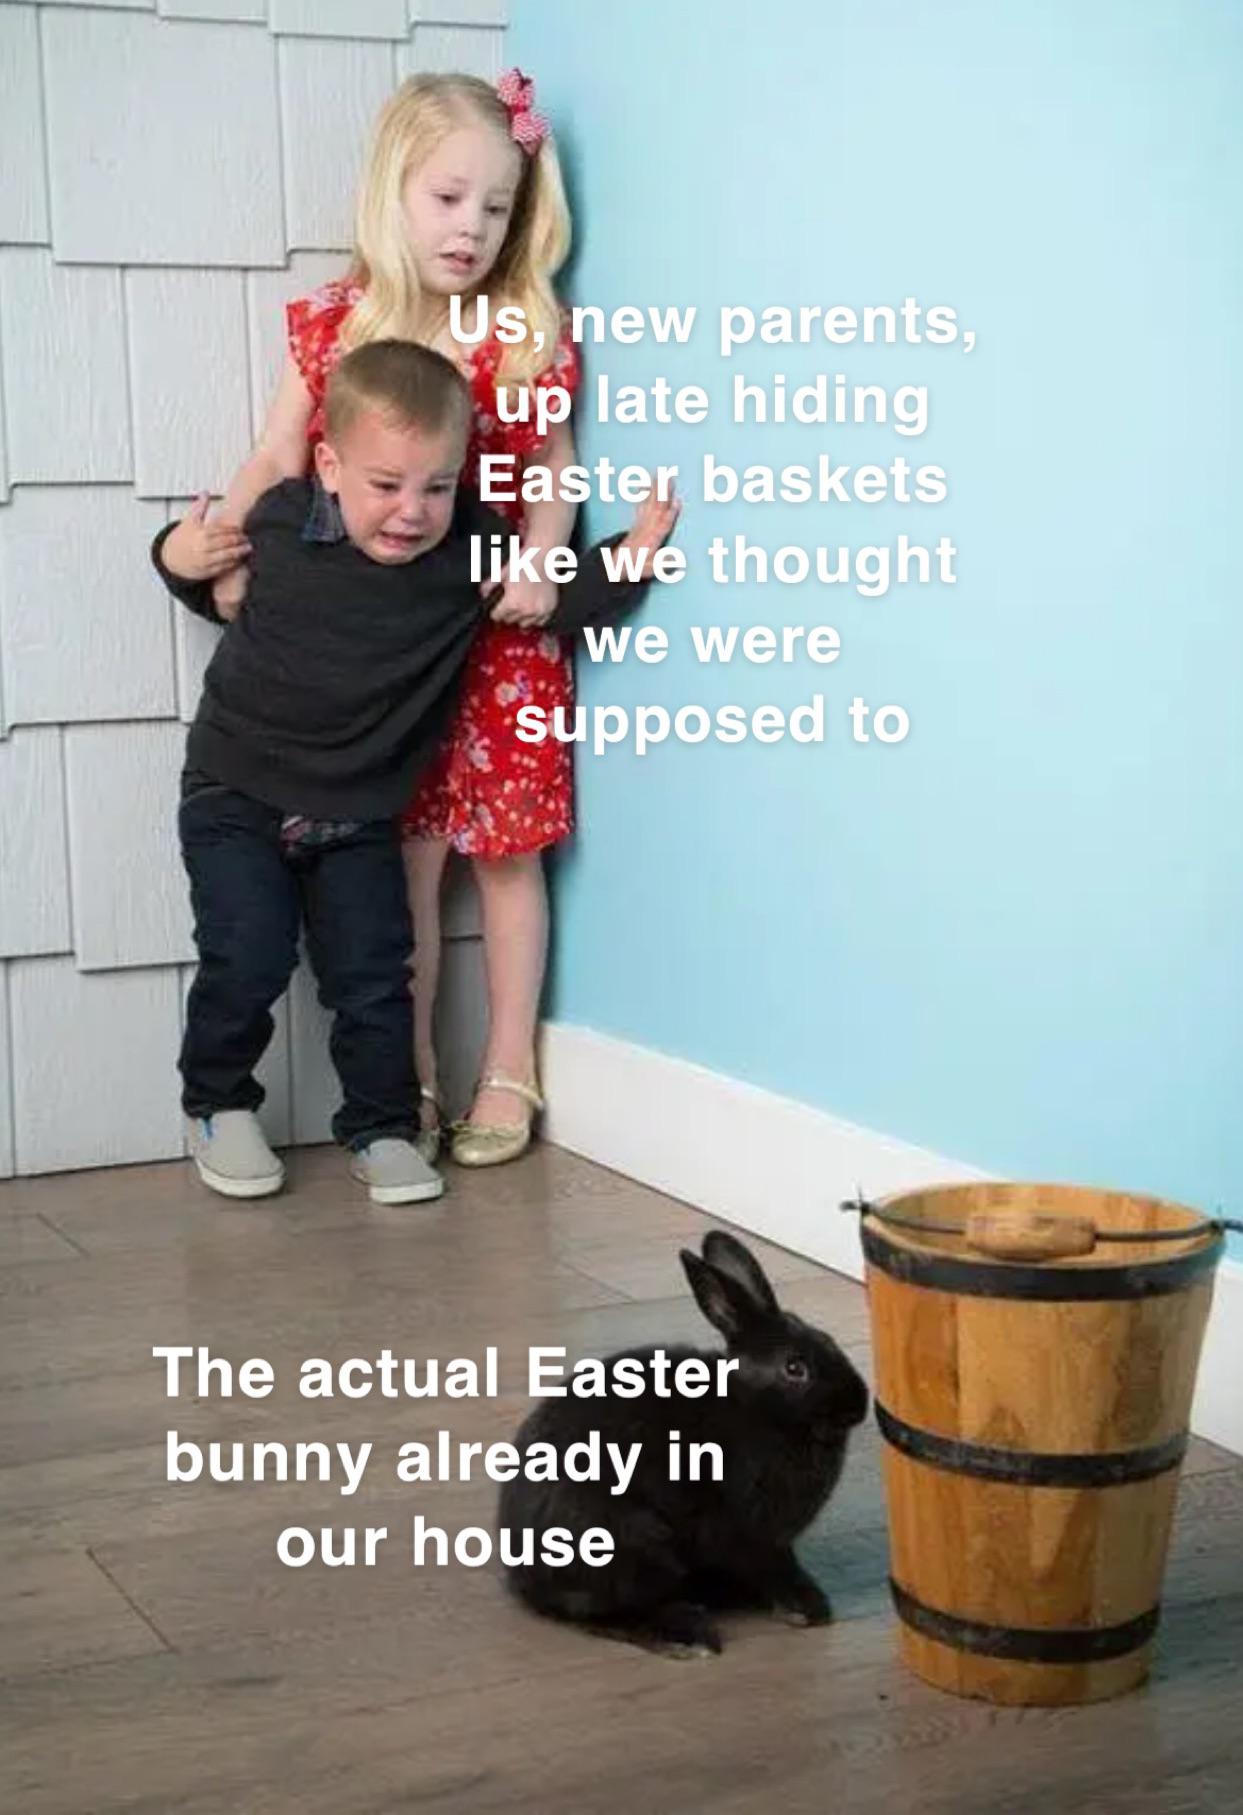 monday morning randomness - toddler - Us, new parents, up late hiding Easter baskets we thought we were supposed to The actual Easter bunny already in our house